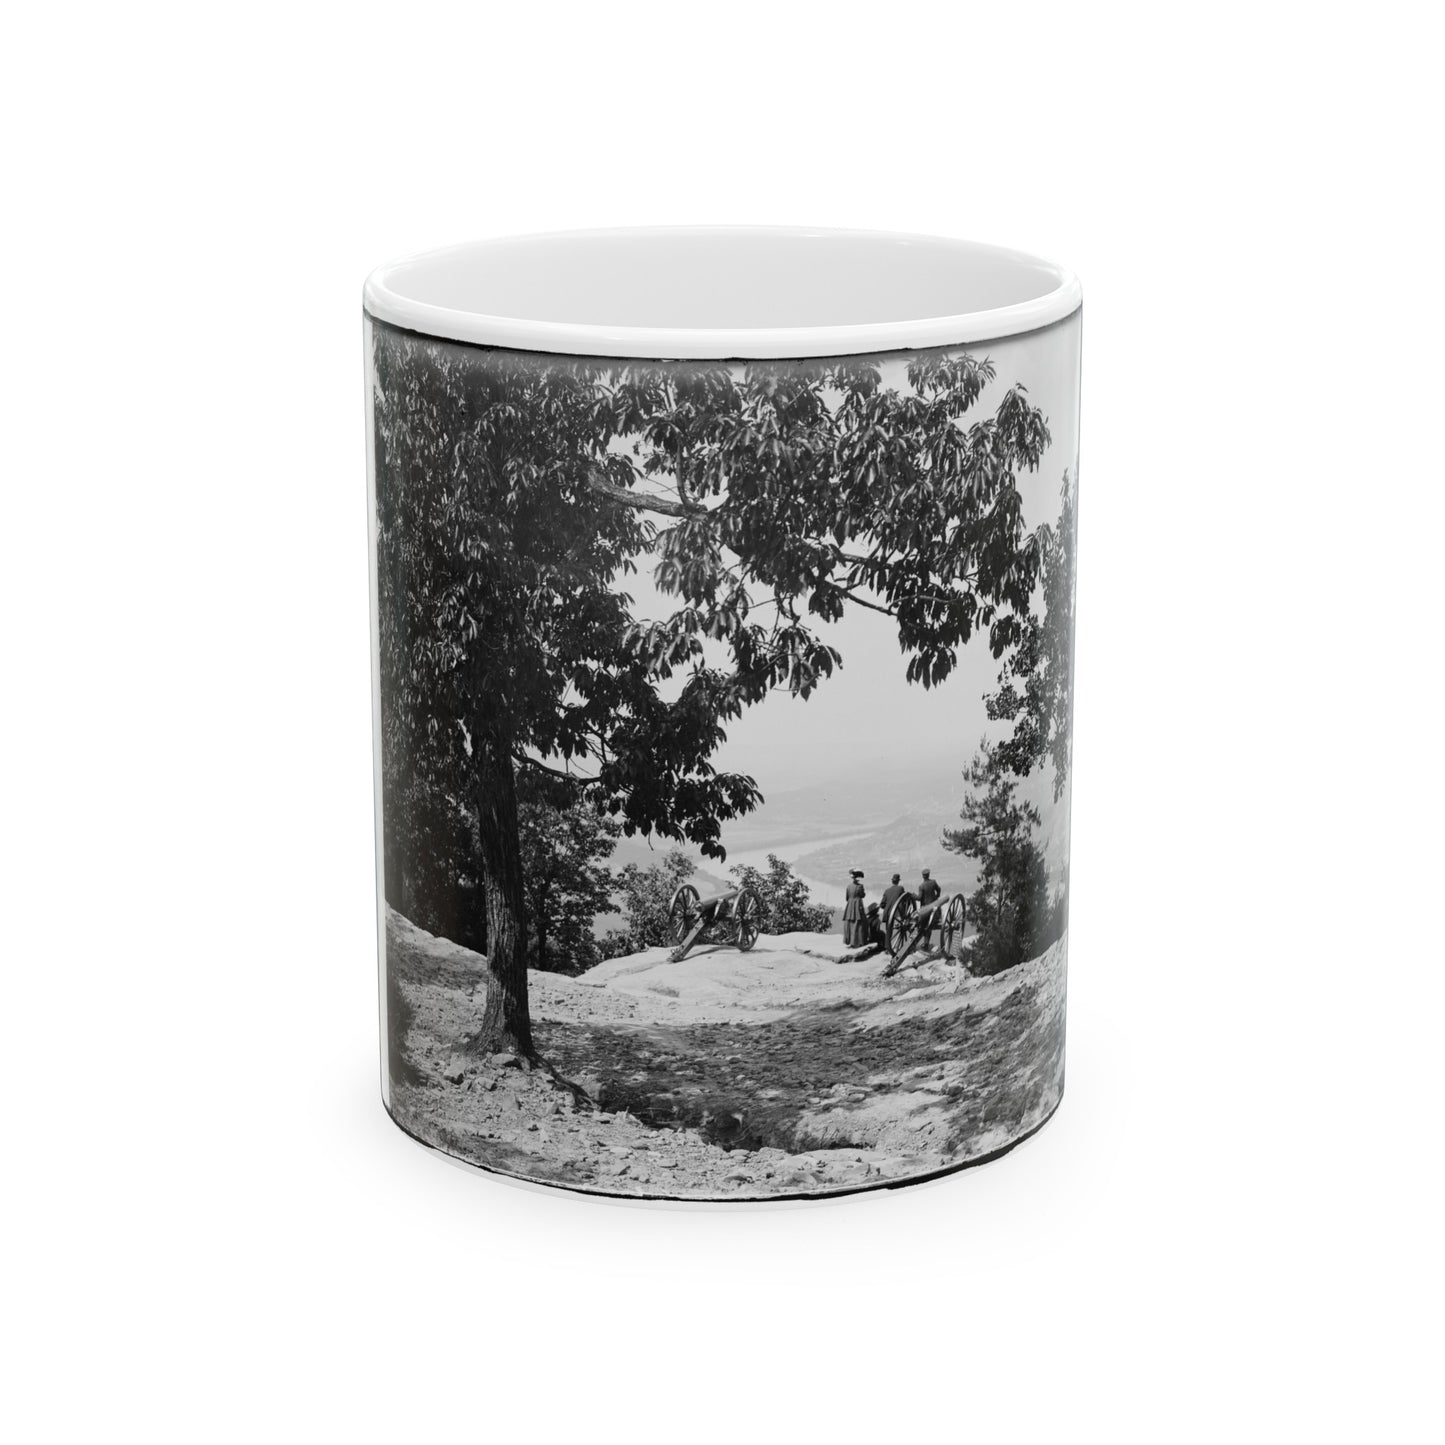 Visitors Observing View From Point At Chickamauga And Chattanooga National Military Park (U.S. Civil War) White Coffee Mug